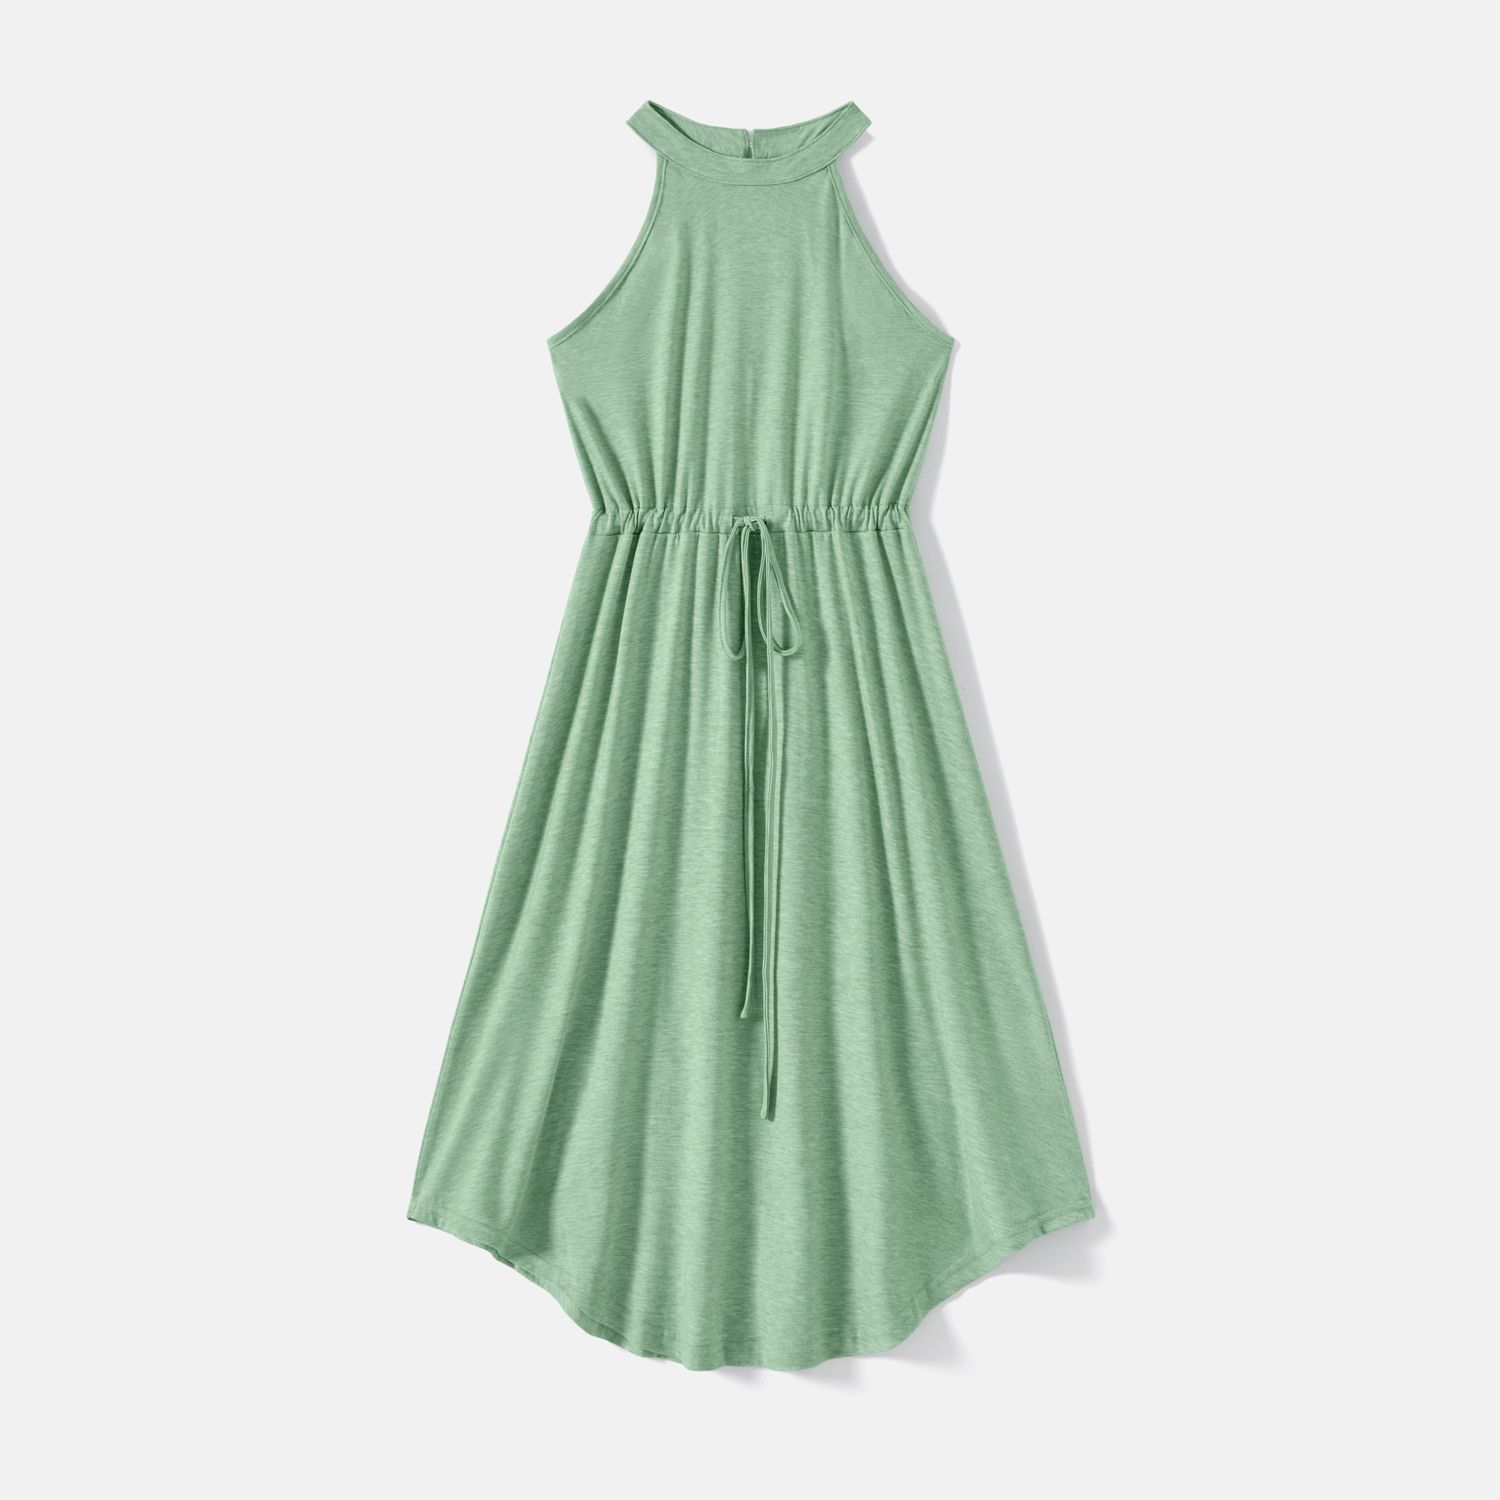 Family Matching Green Halter Neck Sleeveless Drawstring Dresses and Striped Splicing Short-sleeve T-